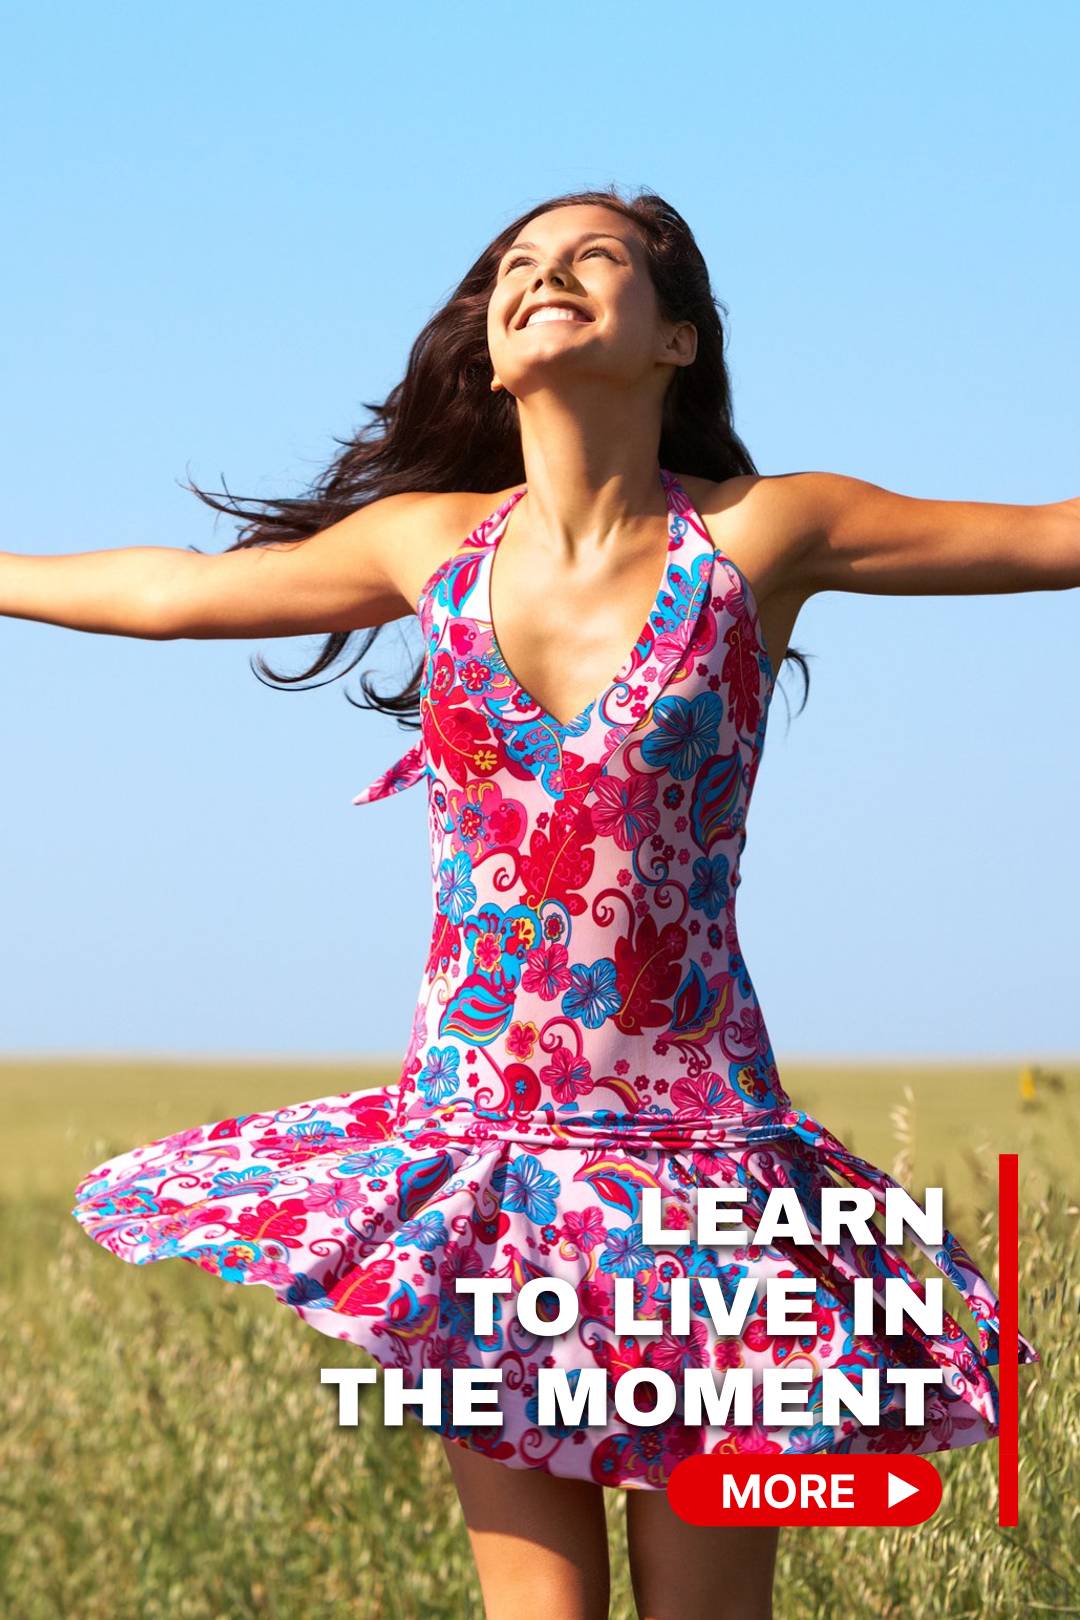 Beautiful smiling woman in a bright blue and red dress looking up in the sky and dancing in the field of wild flowers